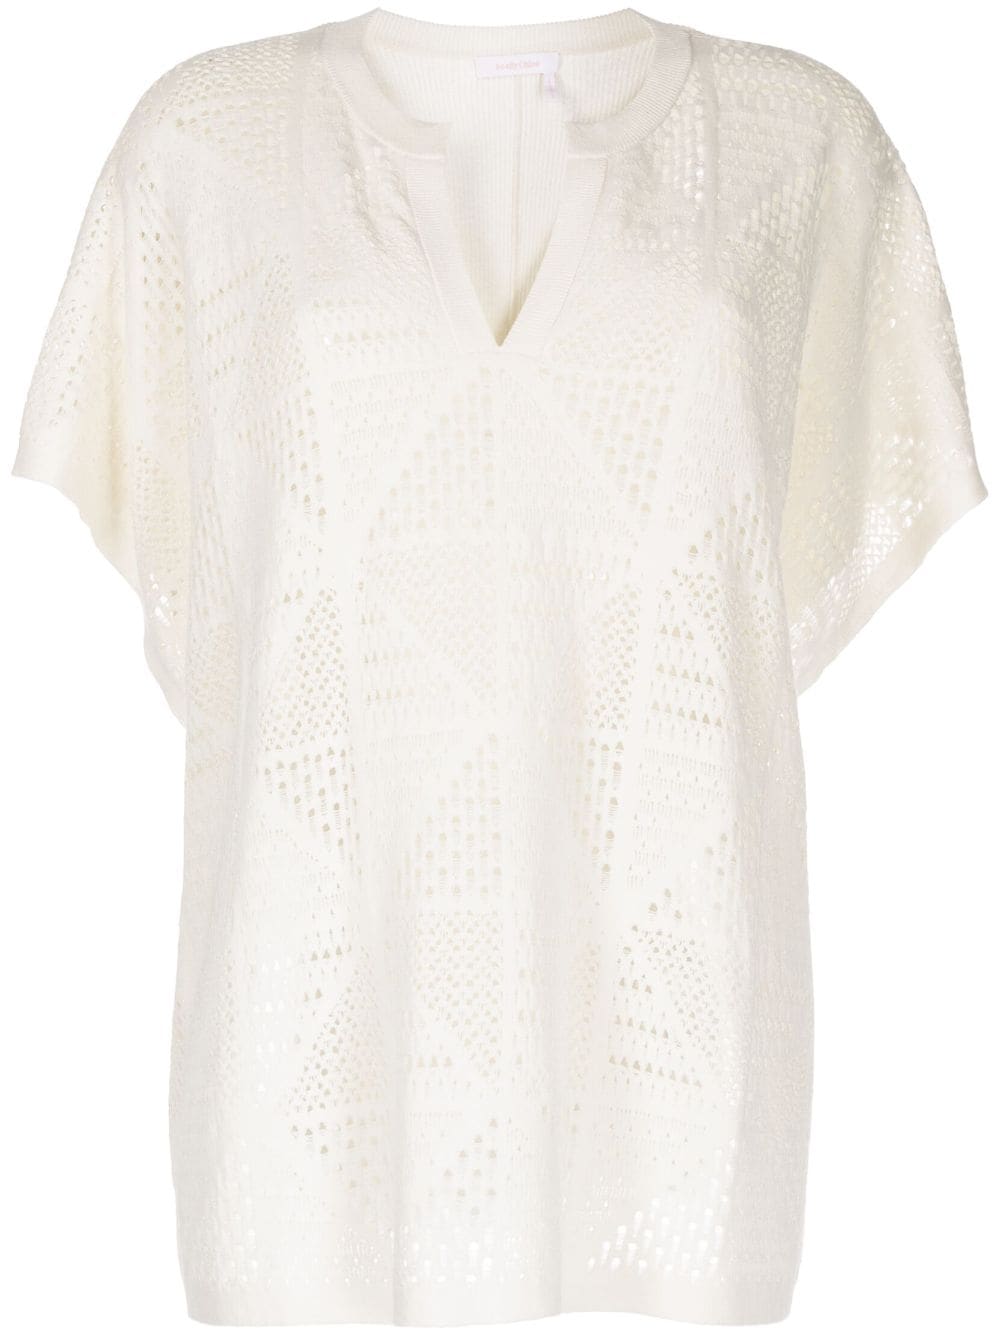 See by Chloé open-knit split-neck top - White von See by Chloé